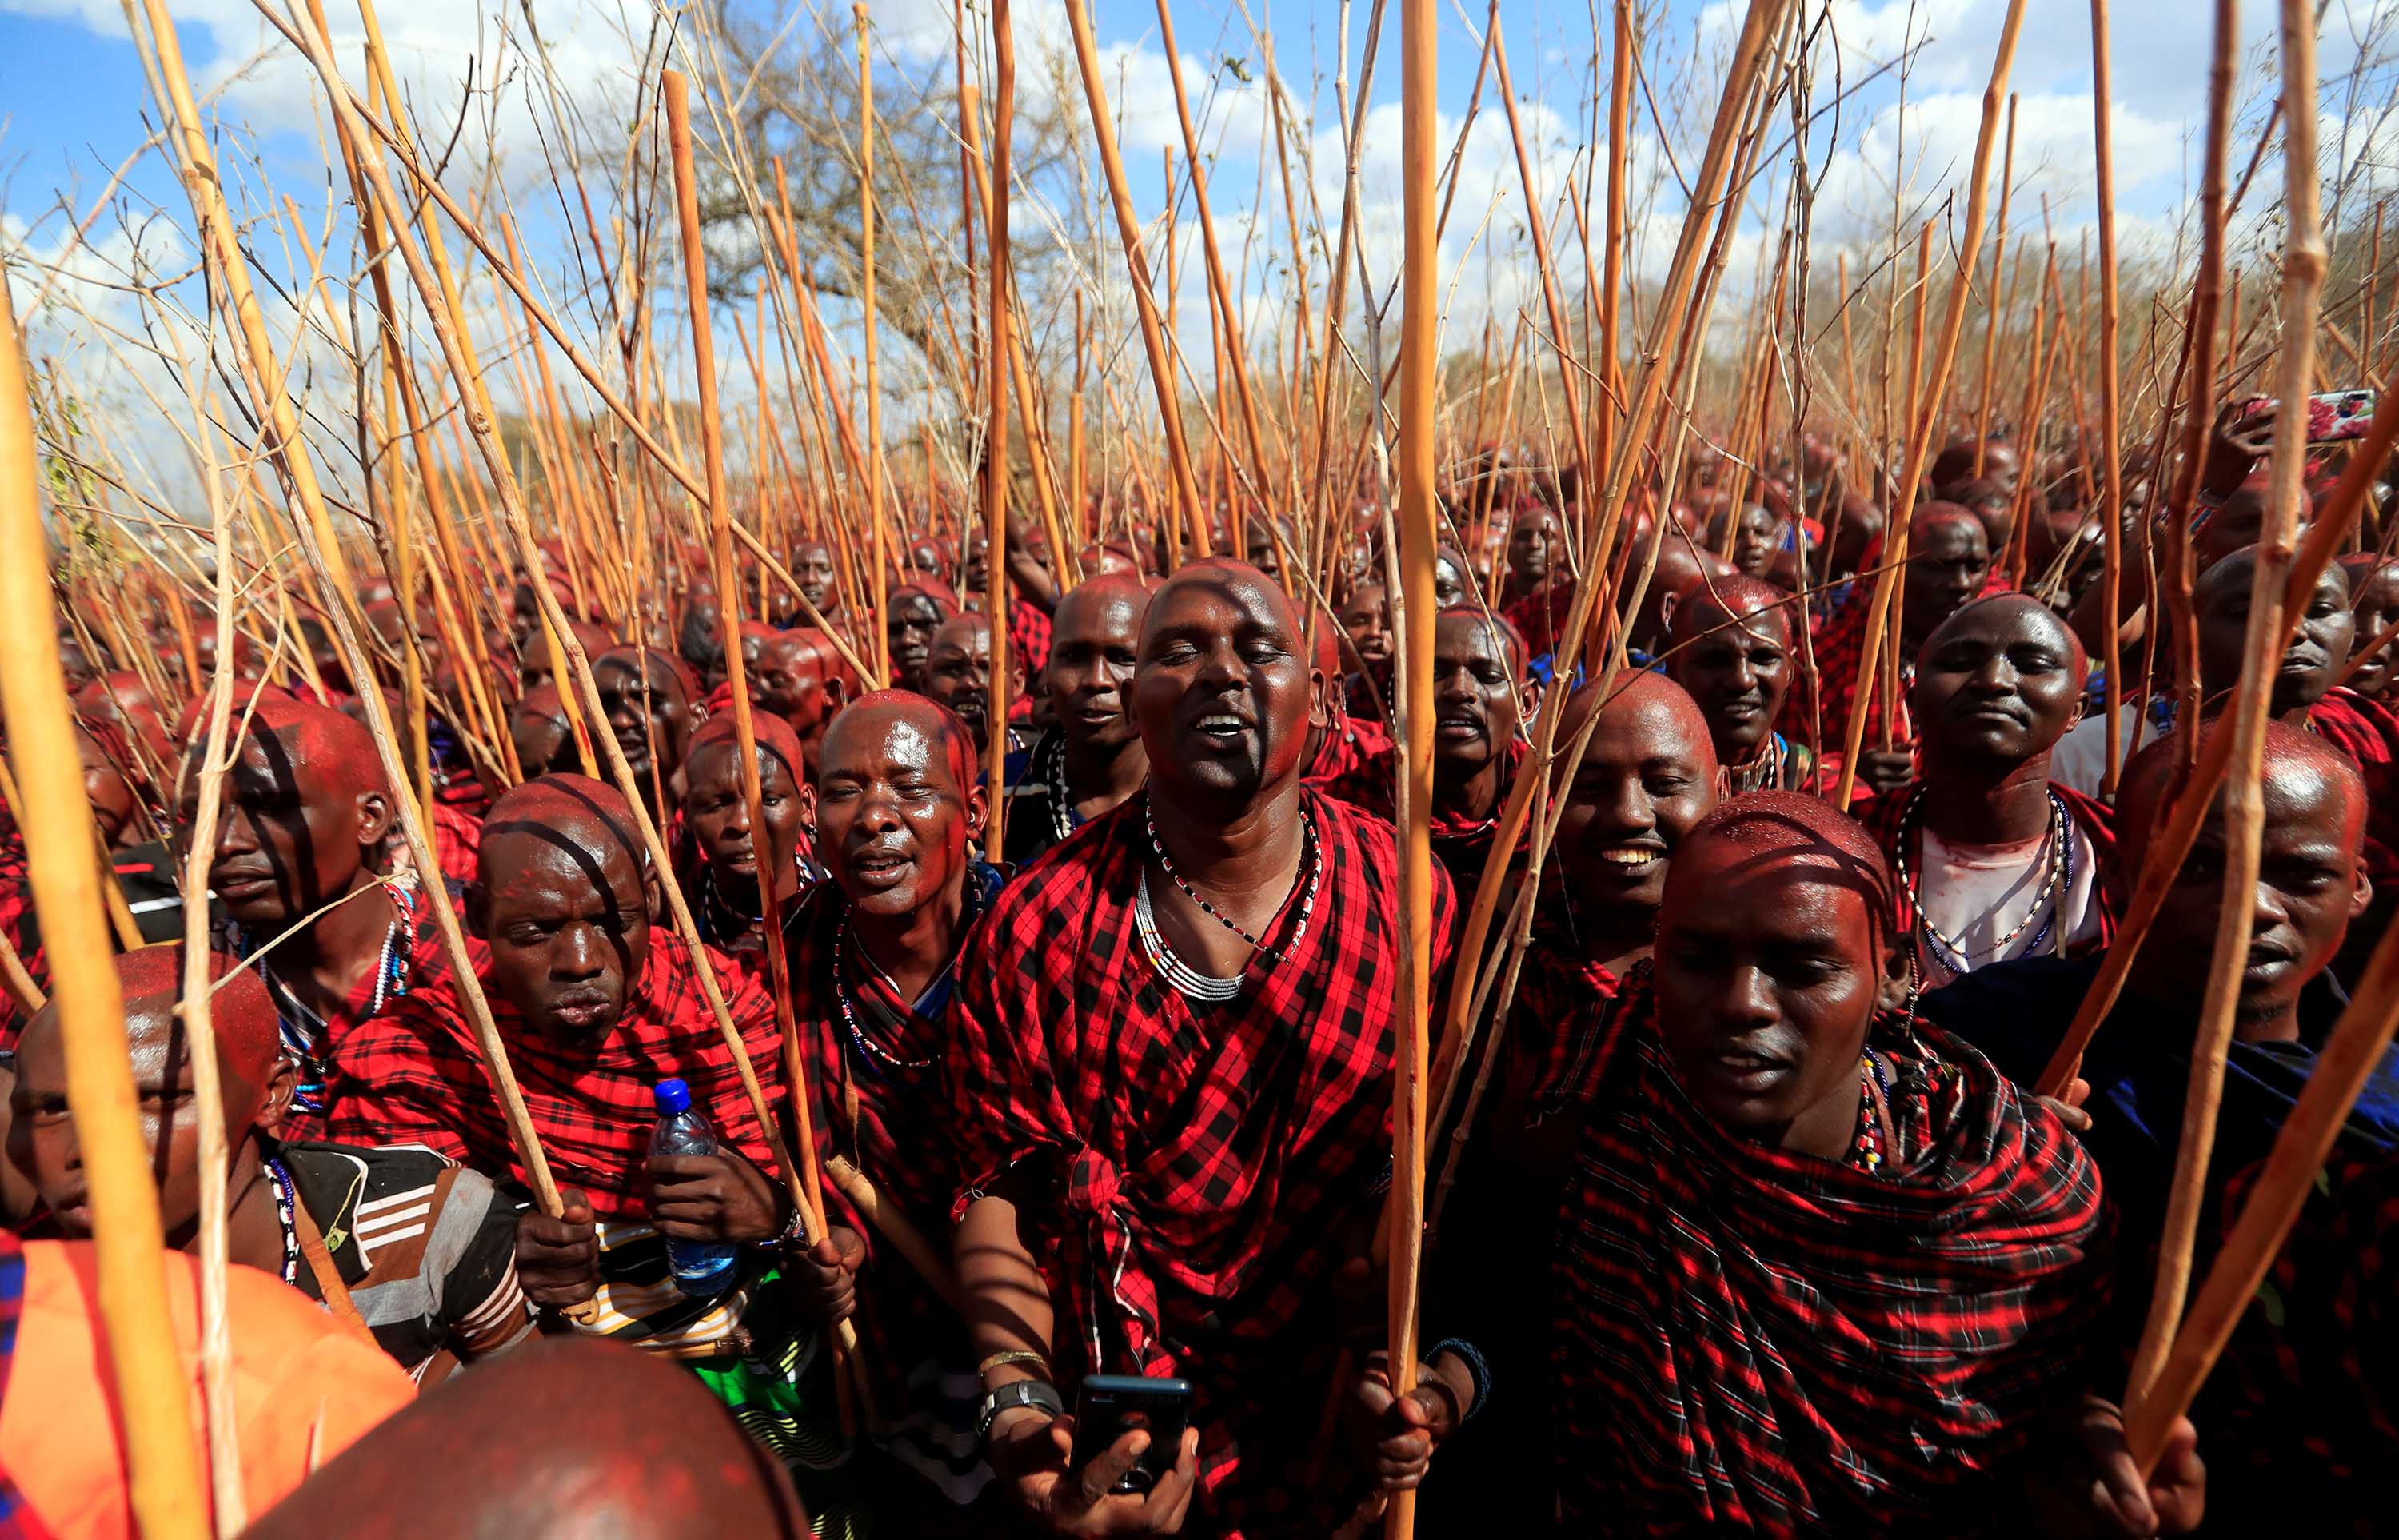 Maasai Hair and Style Explained: How Maasai Rites of Passage